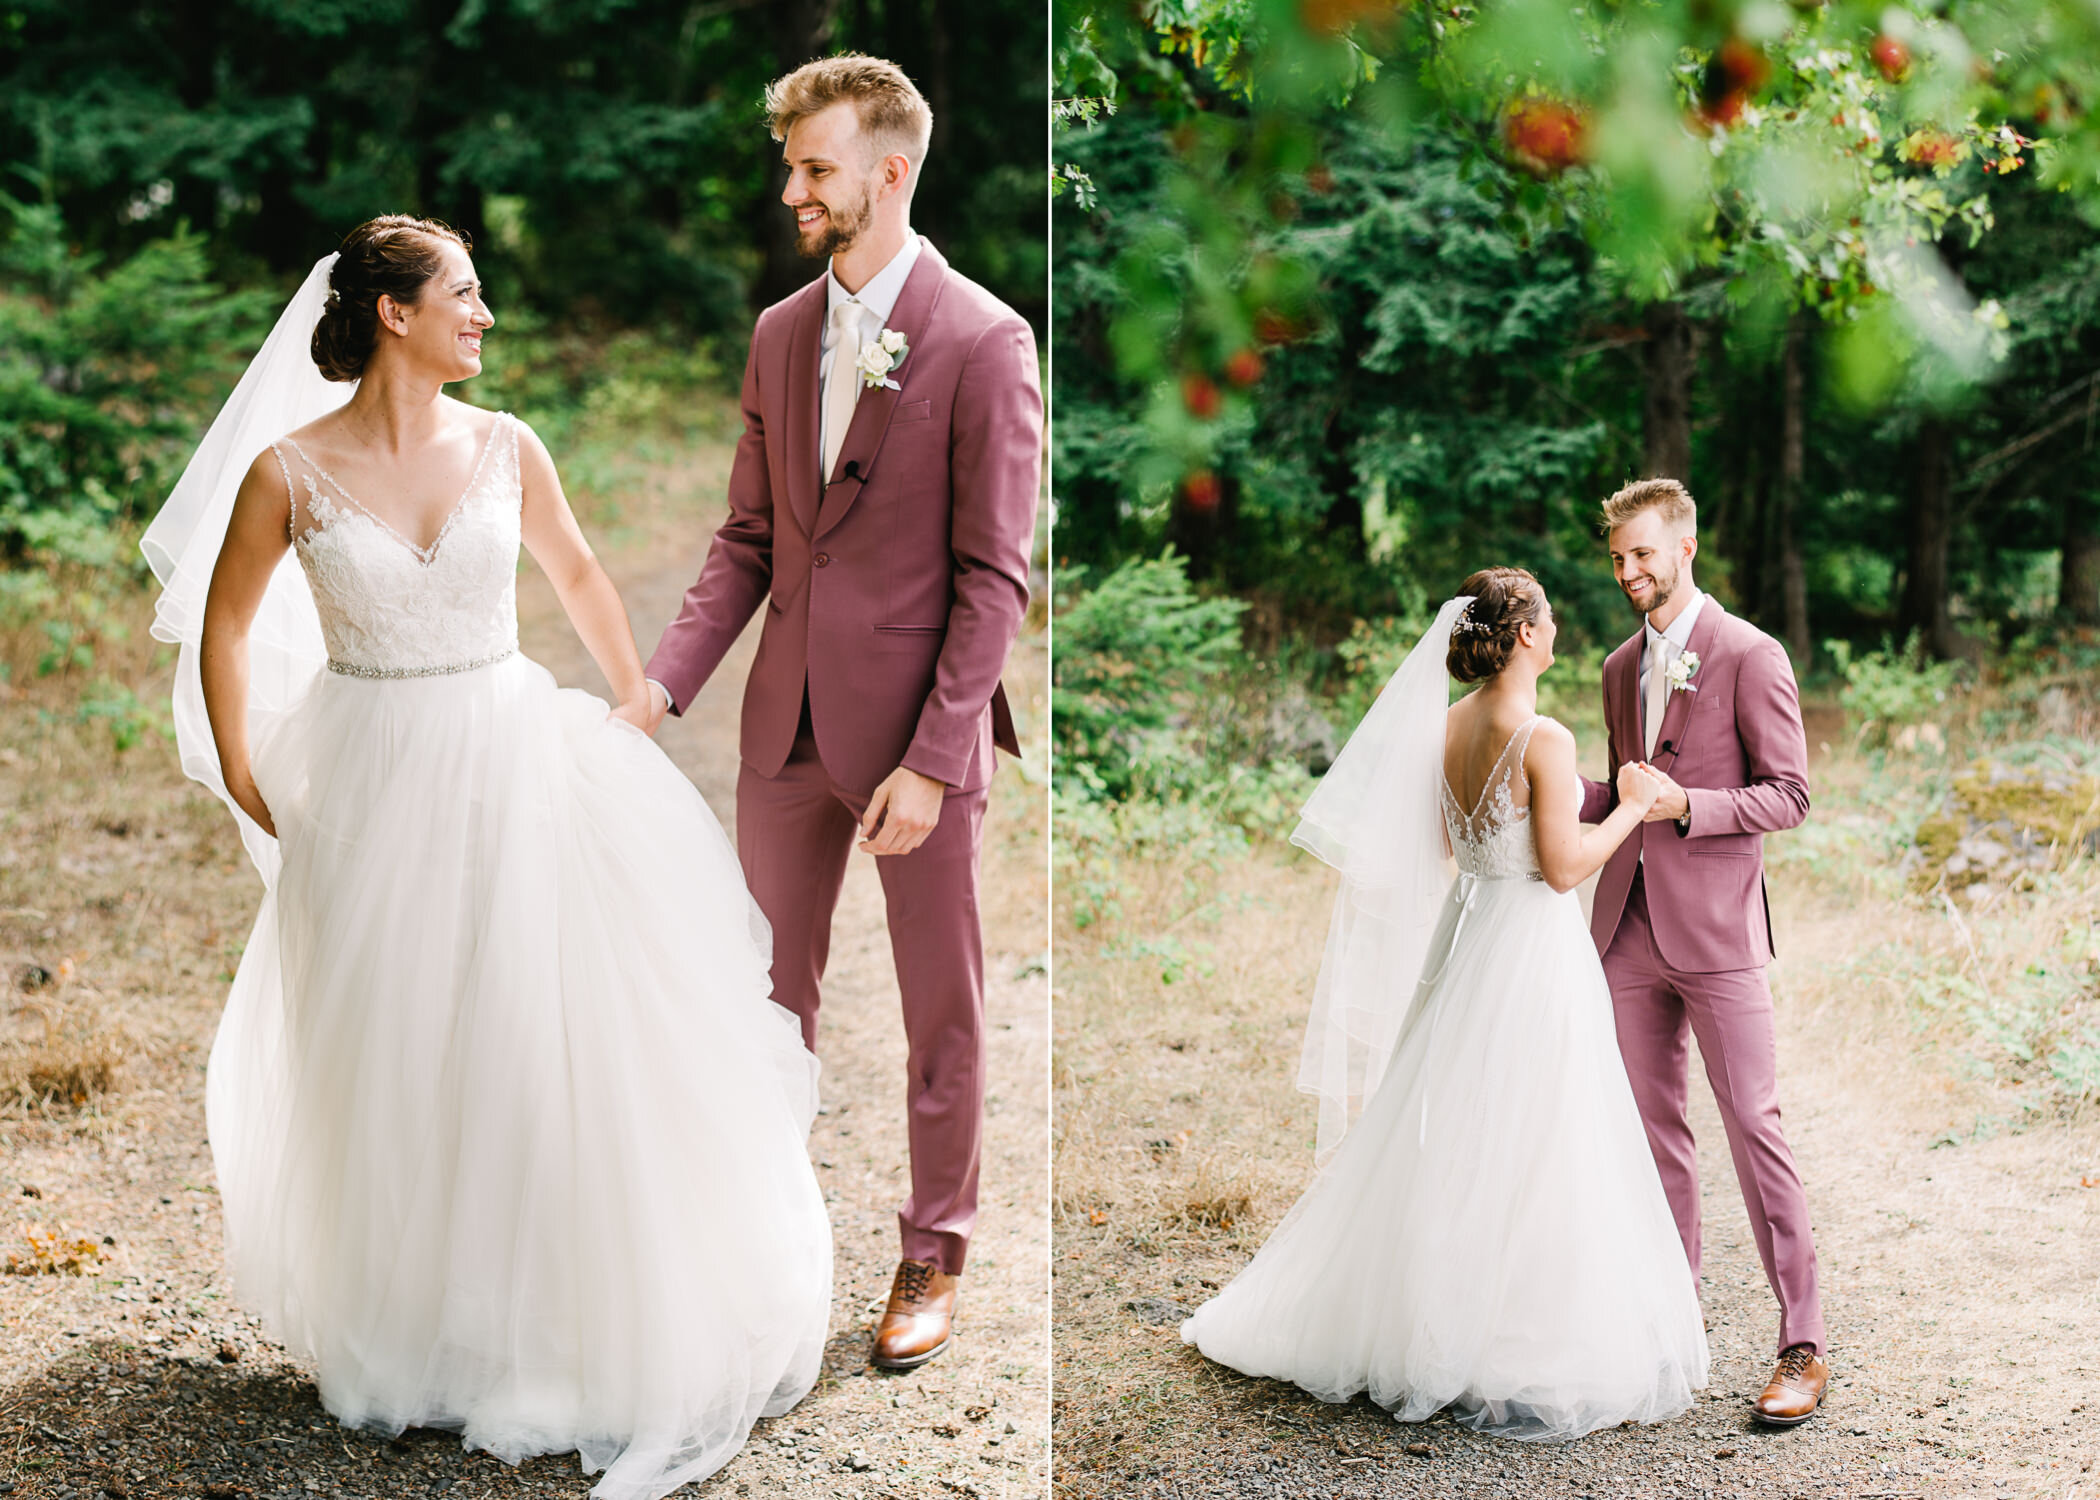  Sun shines on bride in wedding dress as groom sees her for first time 